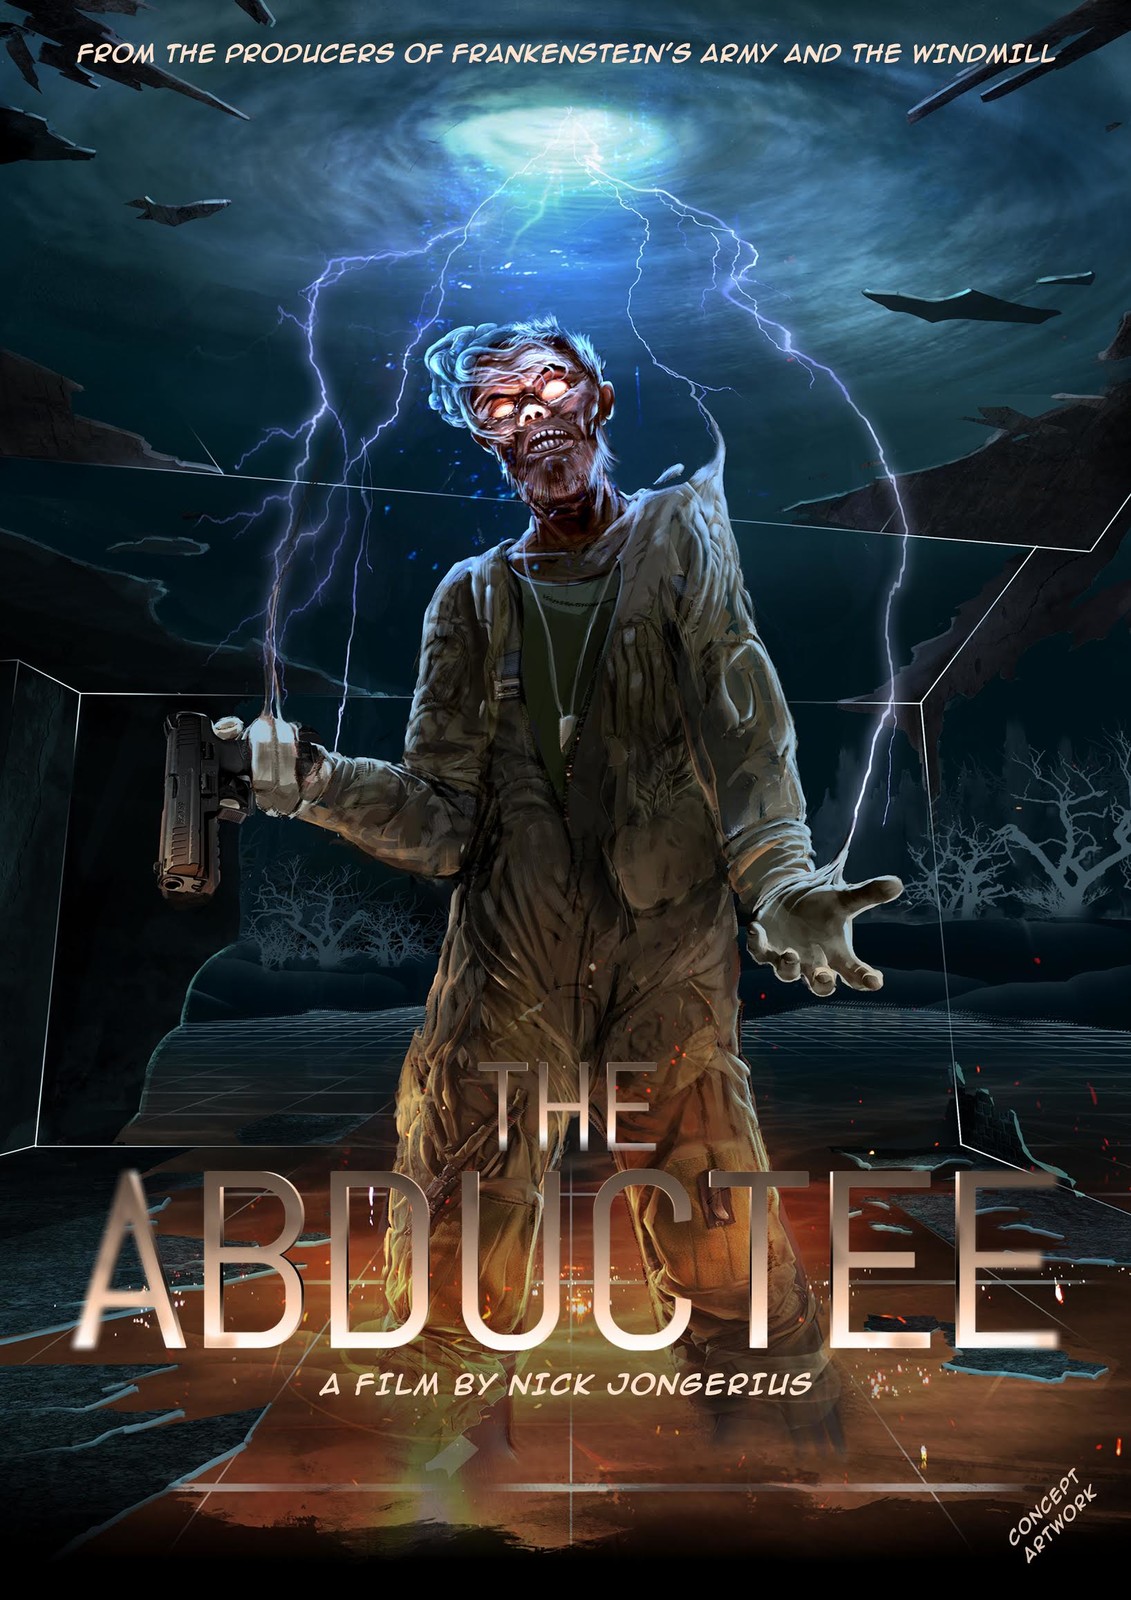 The Abductee Concept art